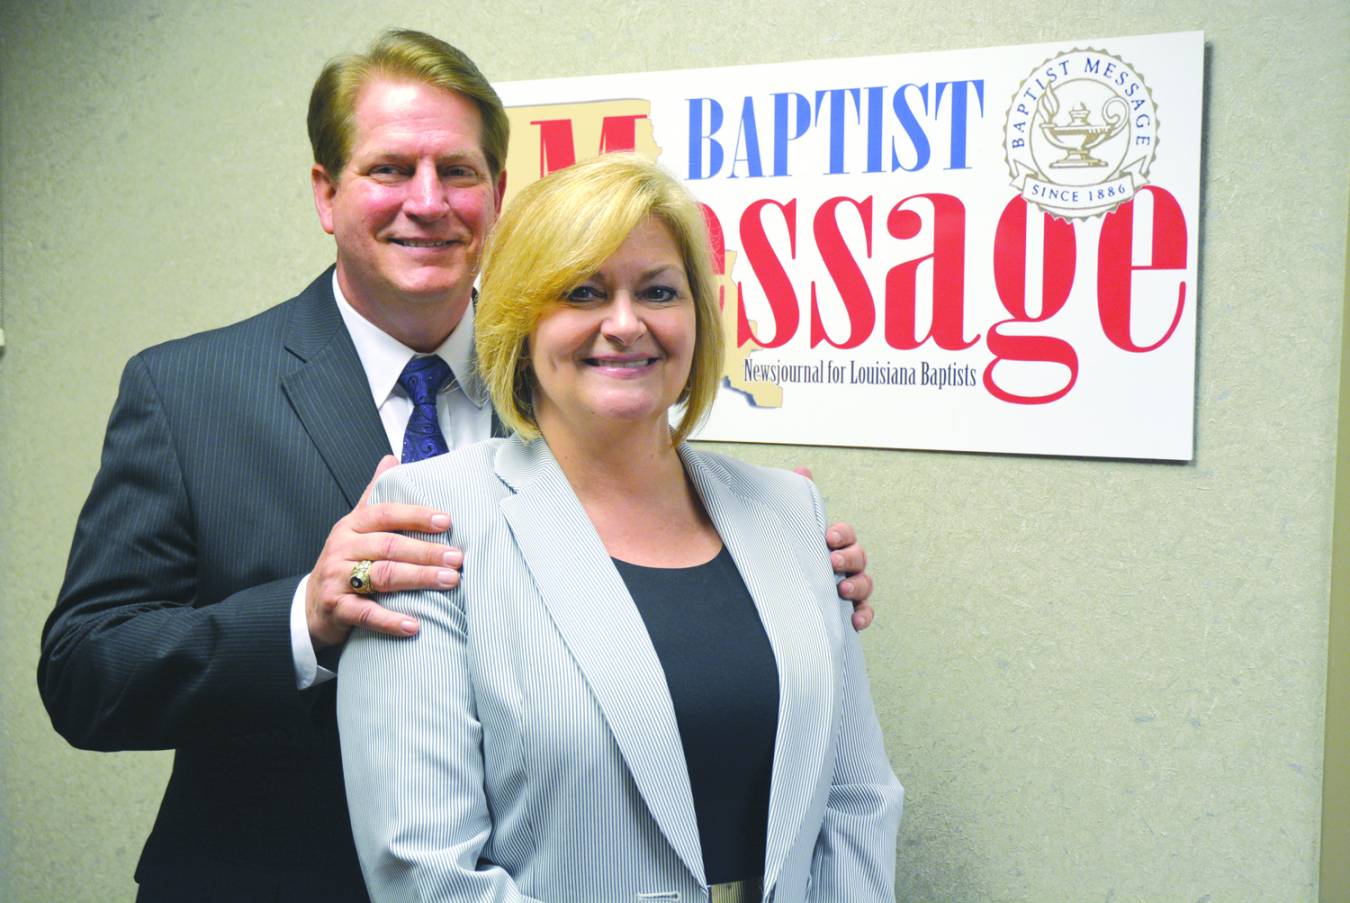 Will Hall unanimously elected new Message editor - Baptist Message